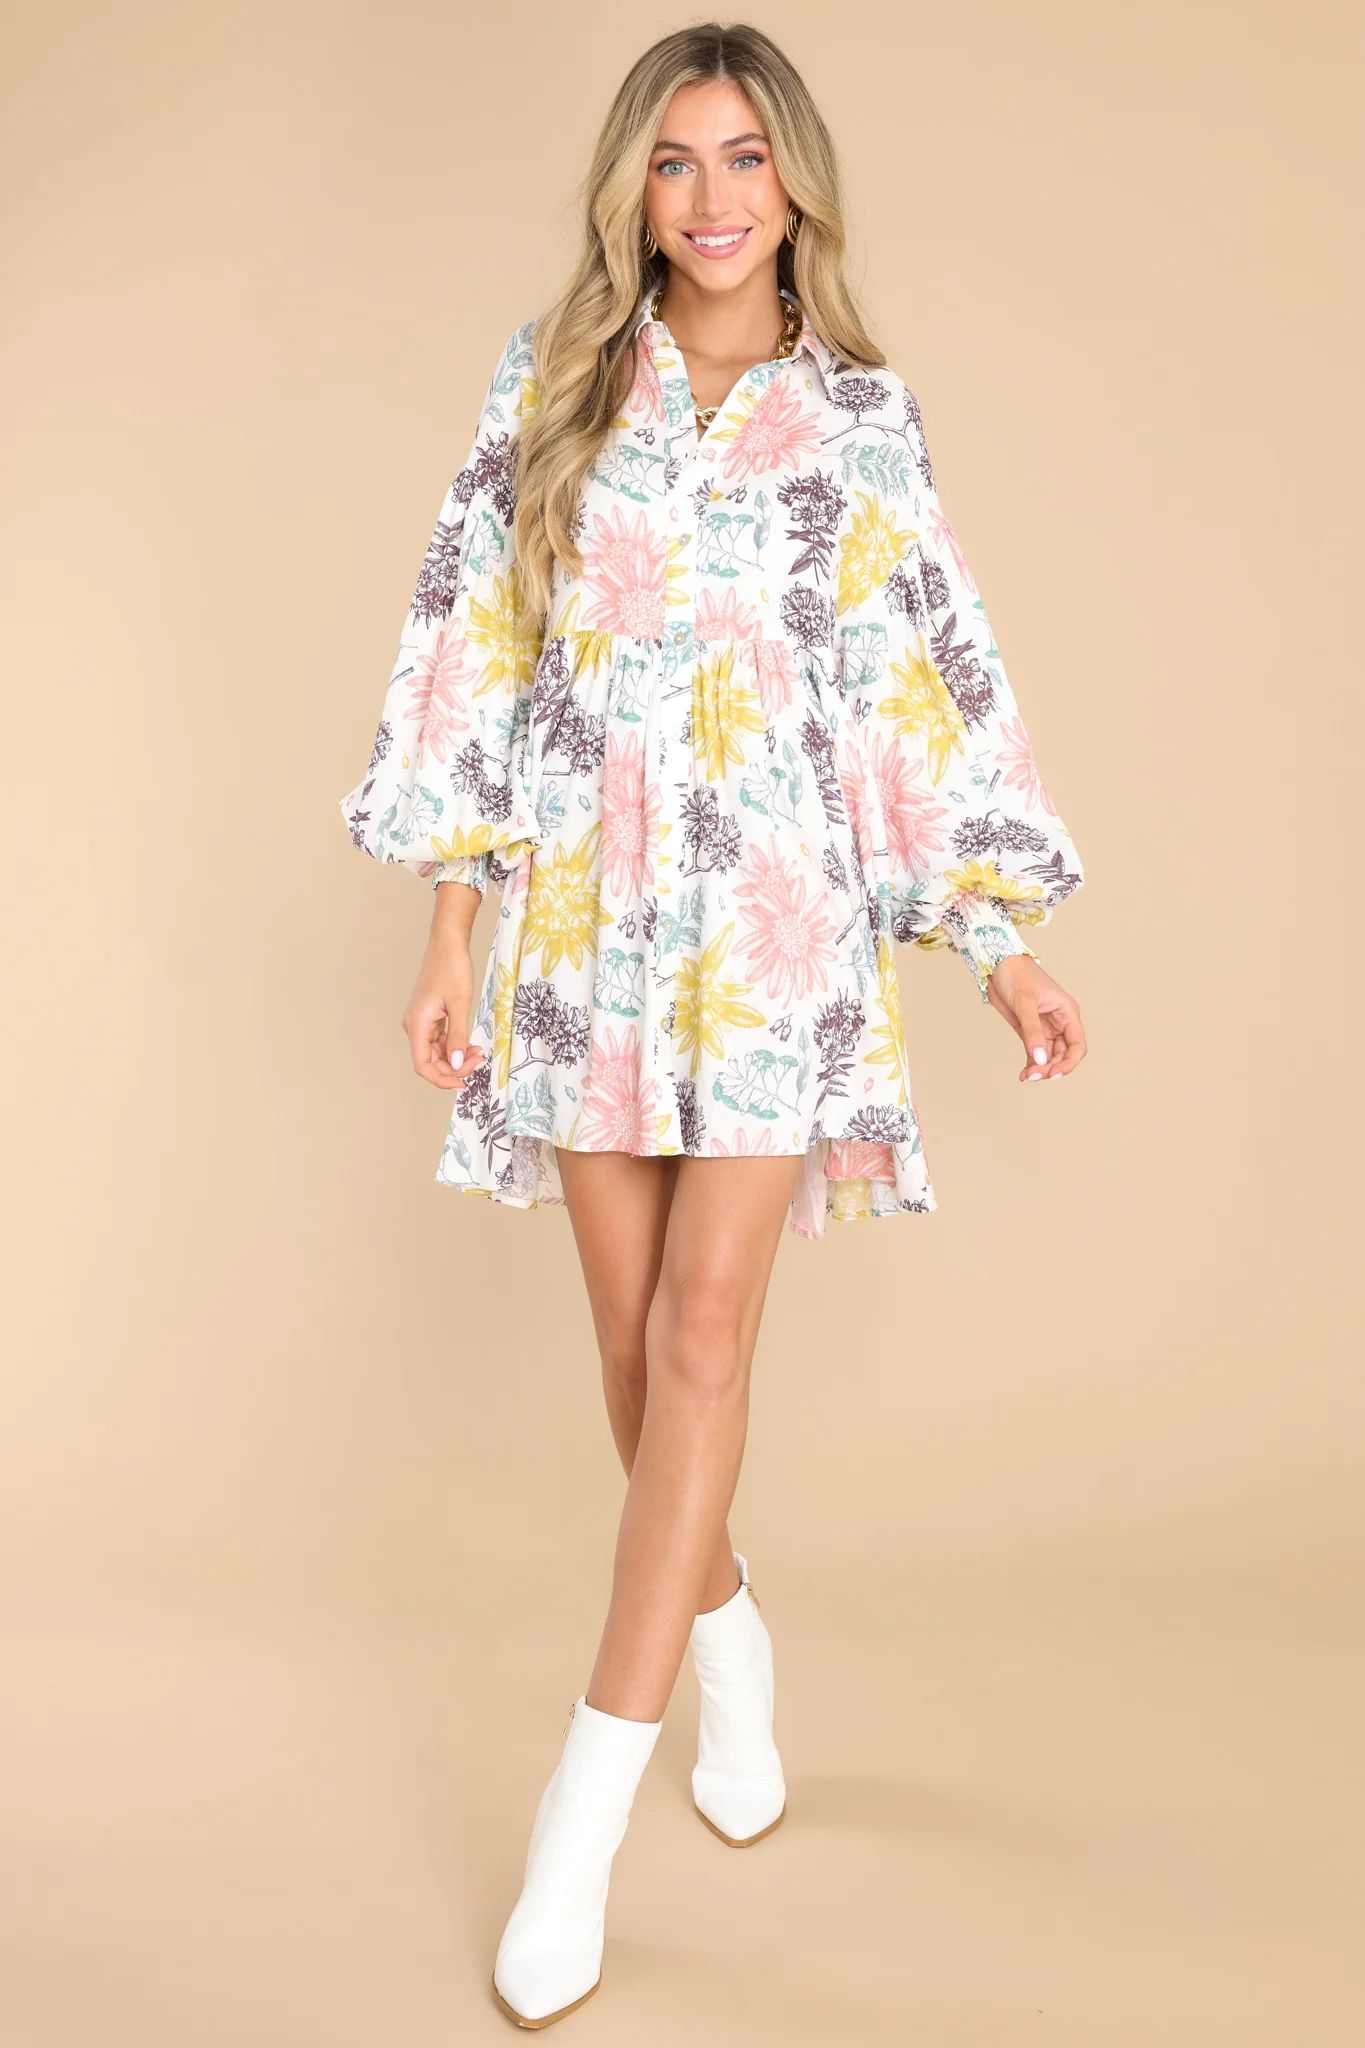 This Is Your Sign Ivory Floral Print Dress | Red Dress 